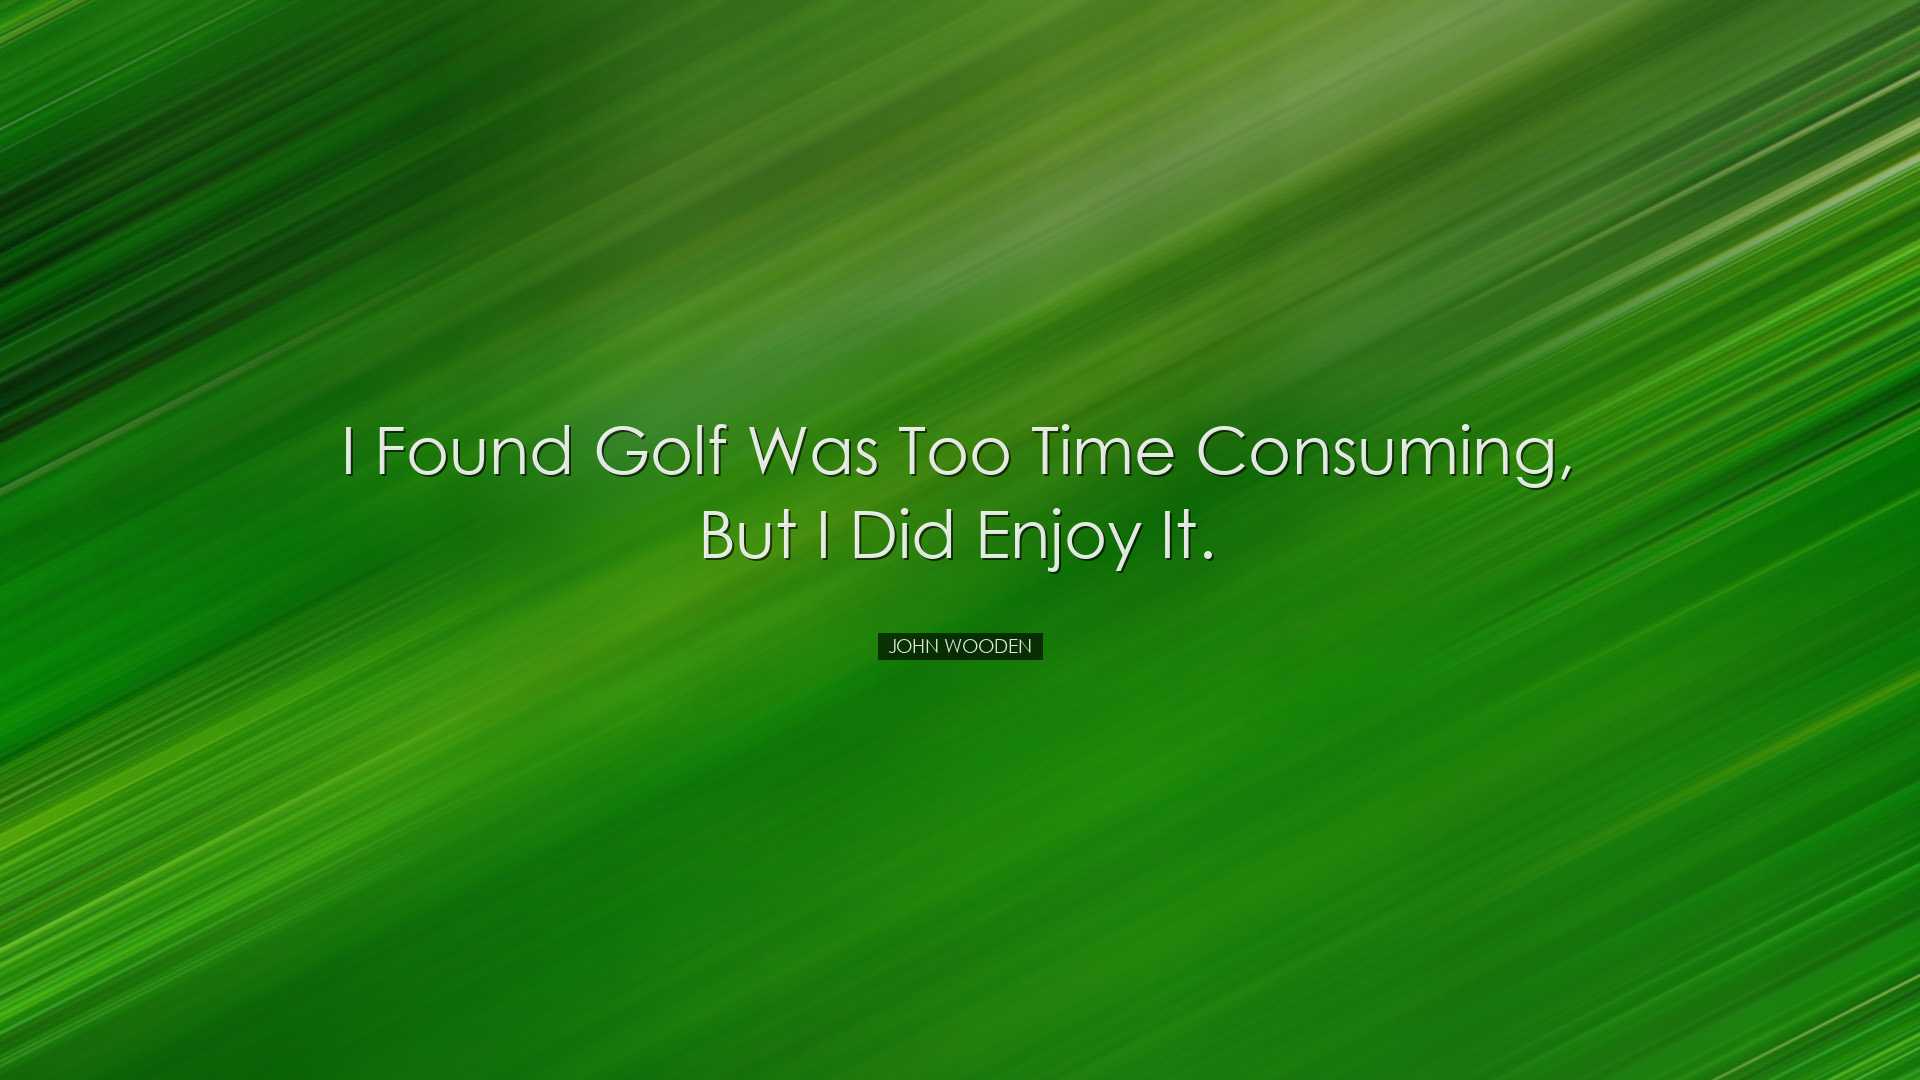 I found golf was too time consuming, but I did enjoy it. - John Wo